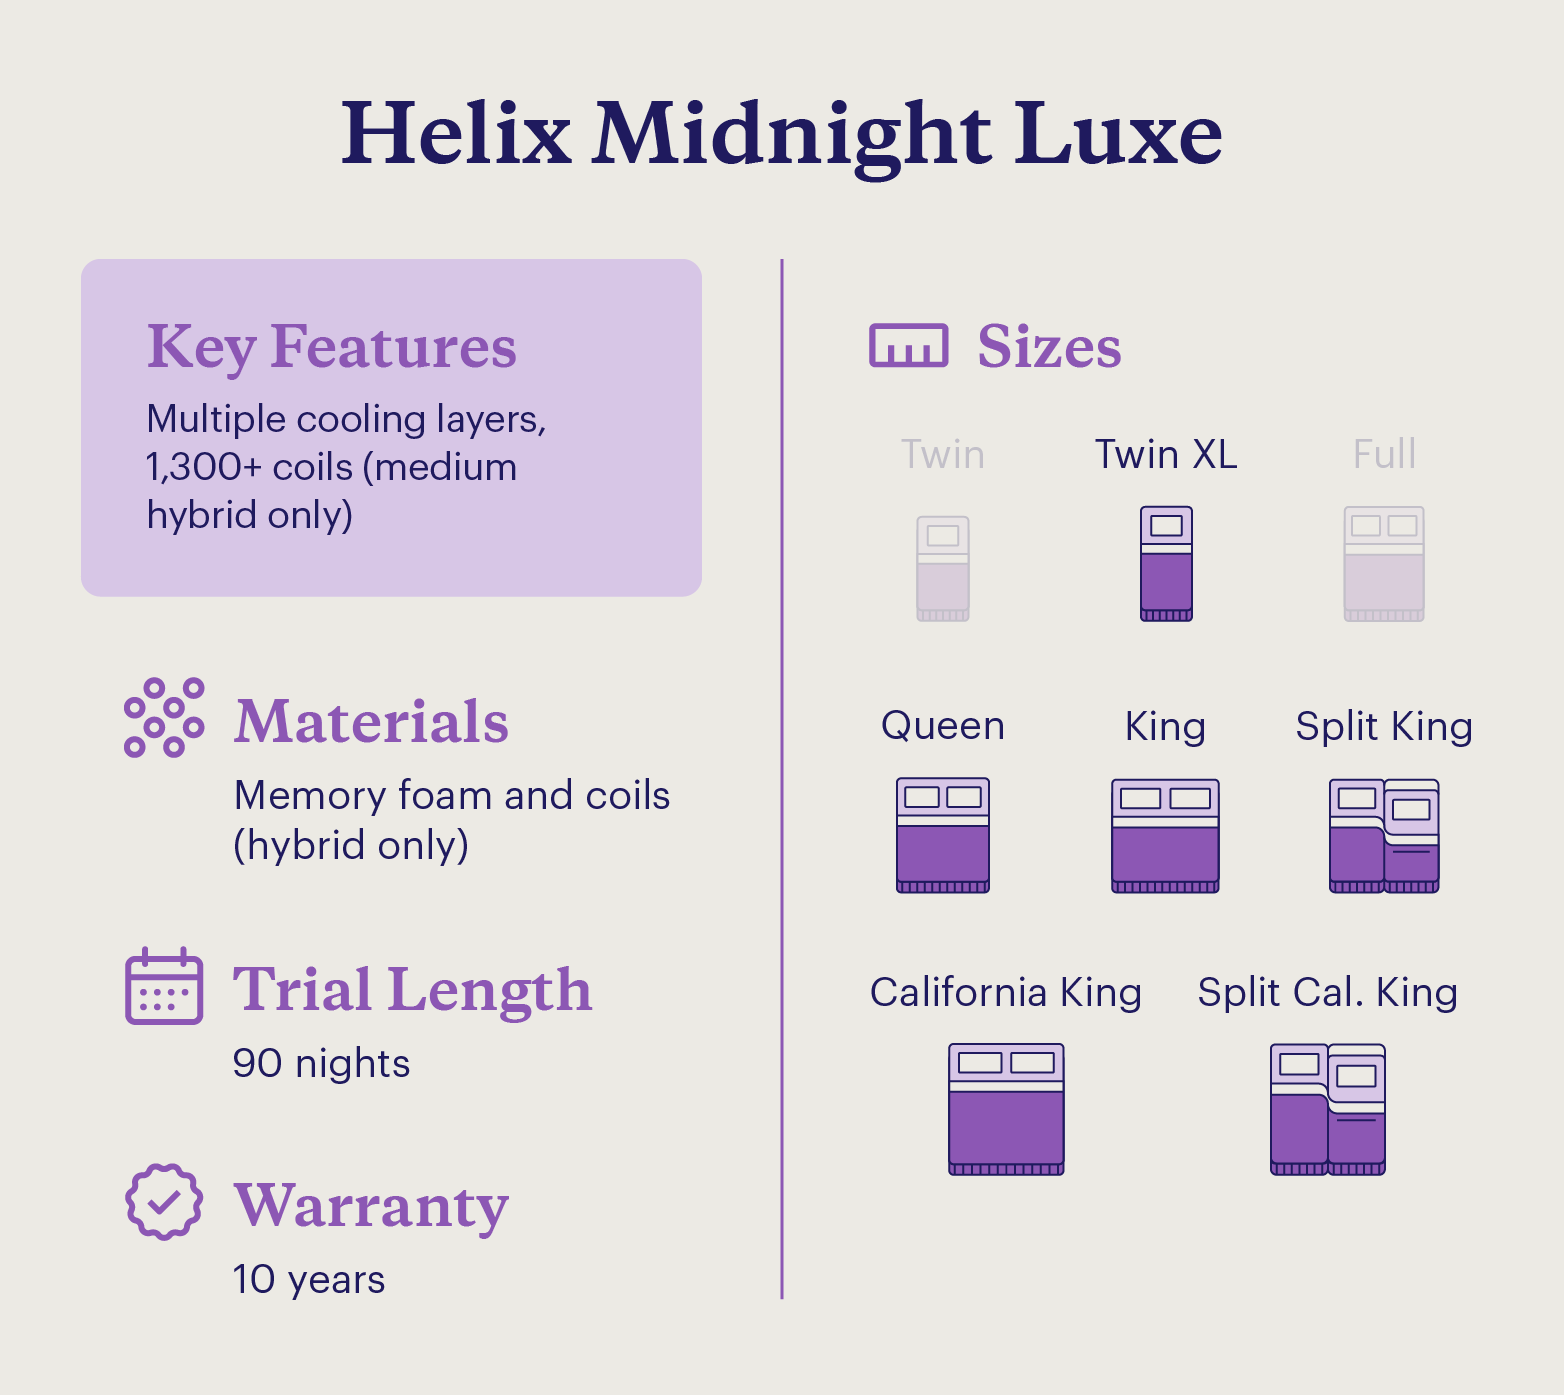 A graphic shows the key features and details of the Helix Midnight Luxe bed.